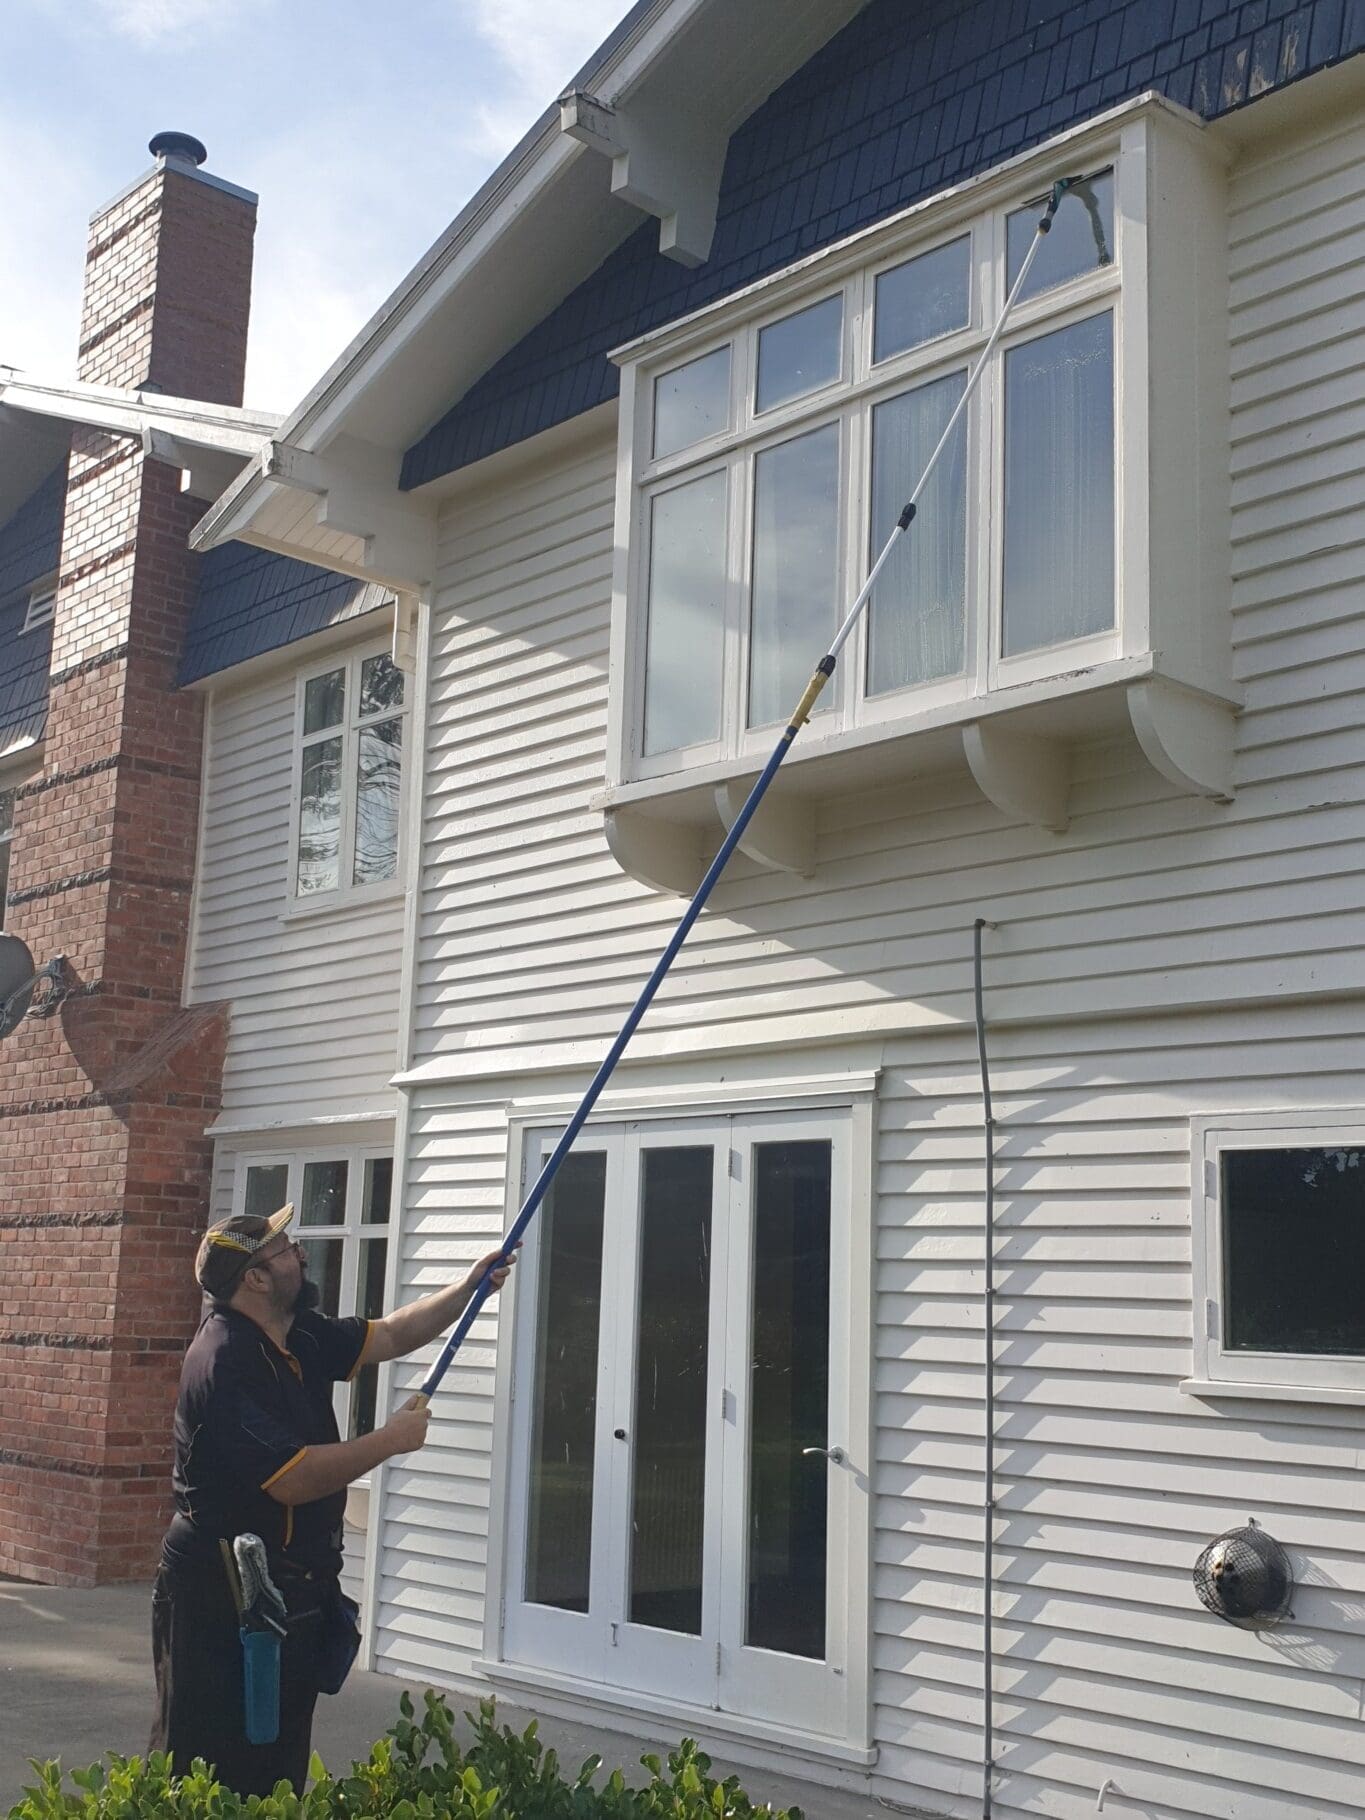 Professional cleaner using an extendable tool to clean upper-story windows of a house in Christchurch